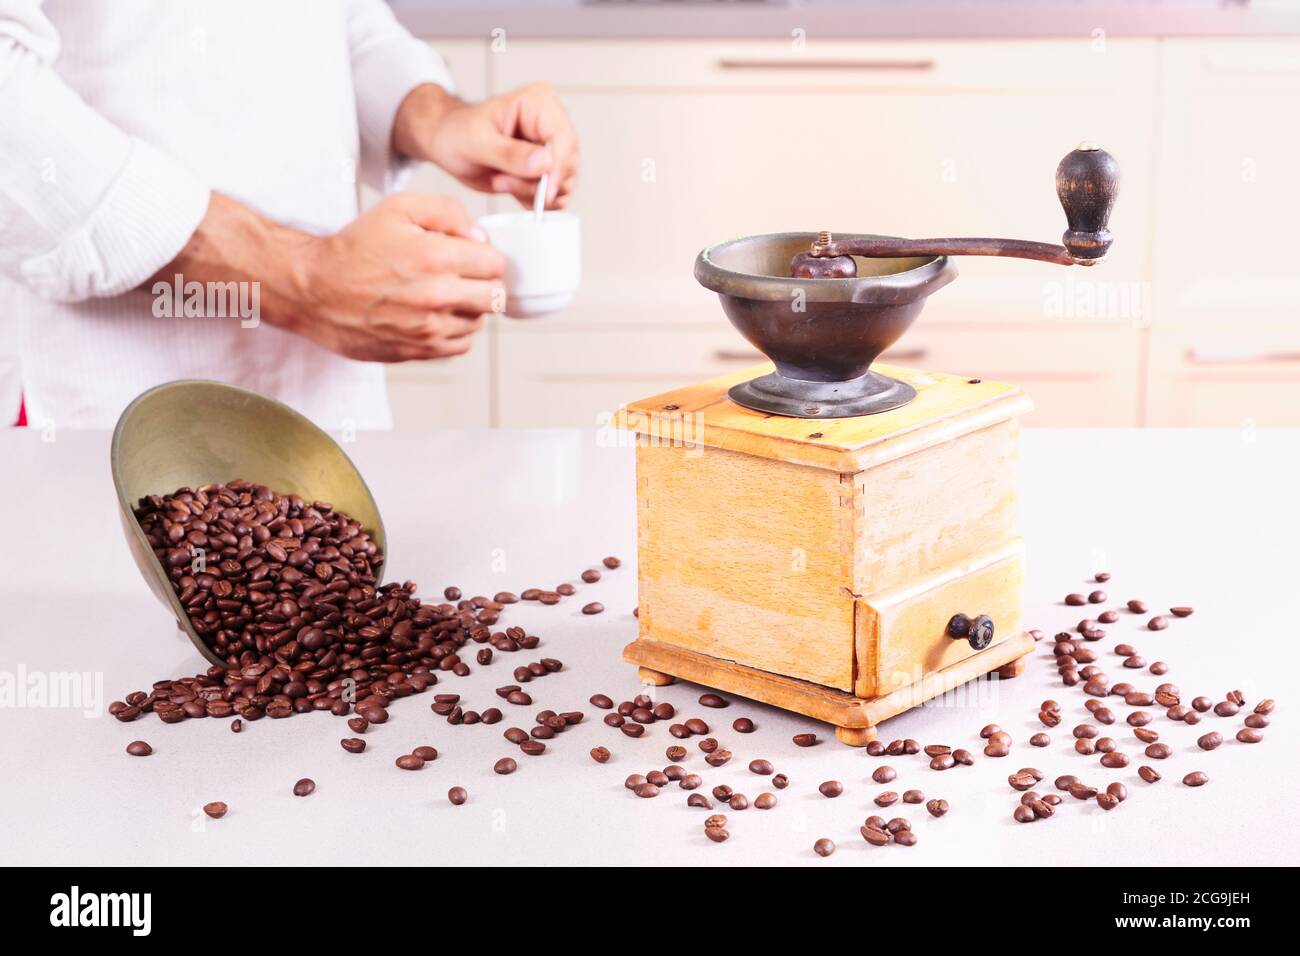 Antique coffee grinder, a bowl with beans spilt and a man with a cup of coffee Stock Photo